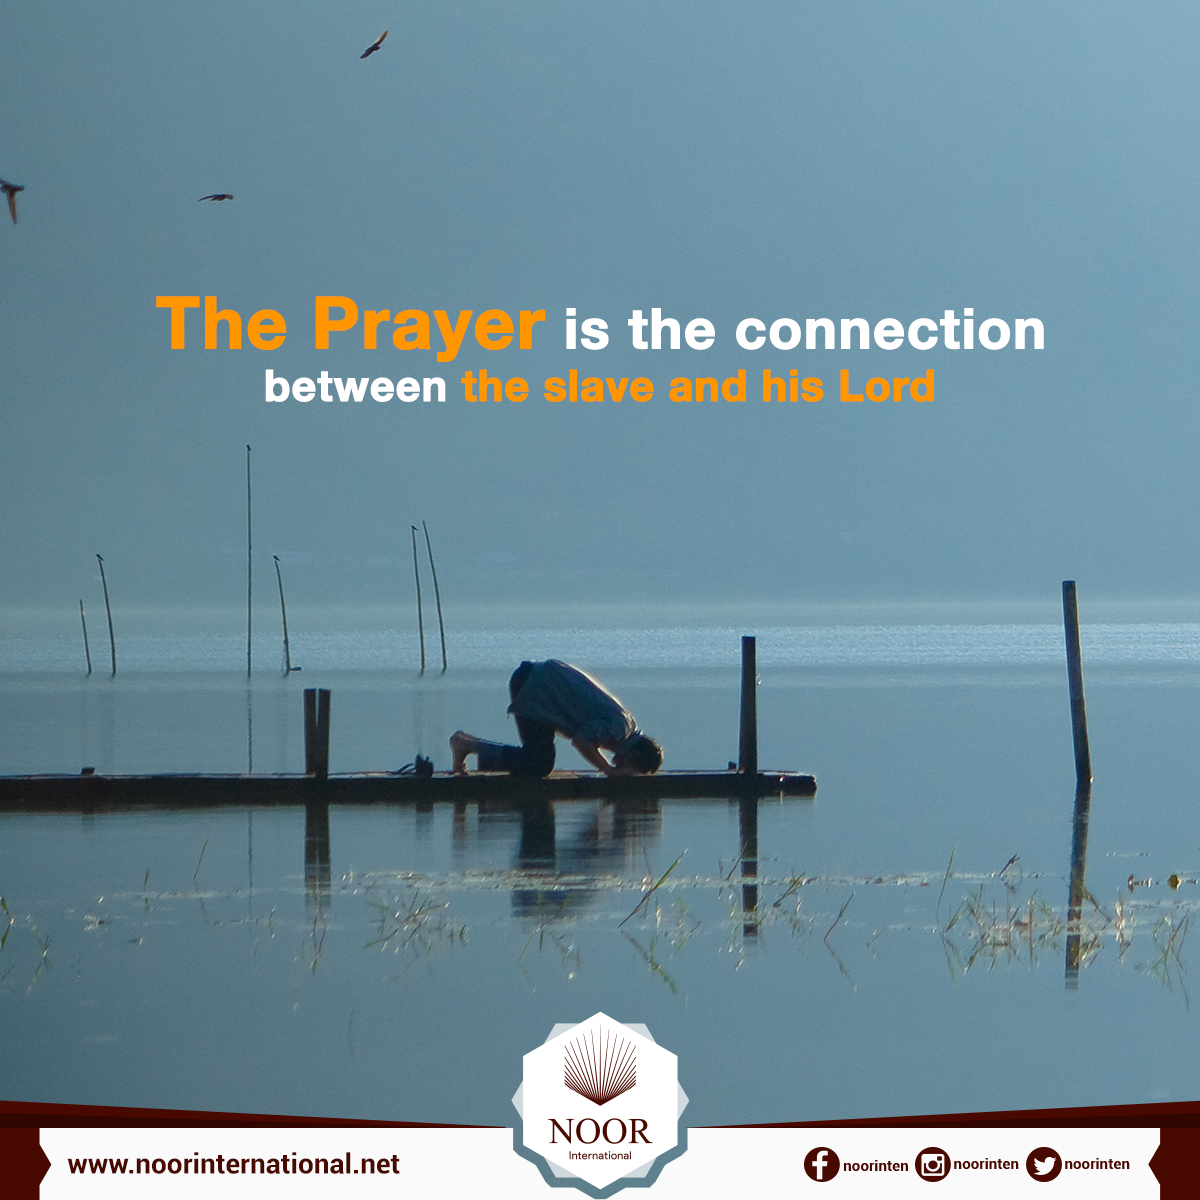 The Prayer is the connection between the slave and his Lord